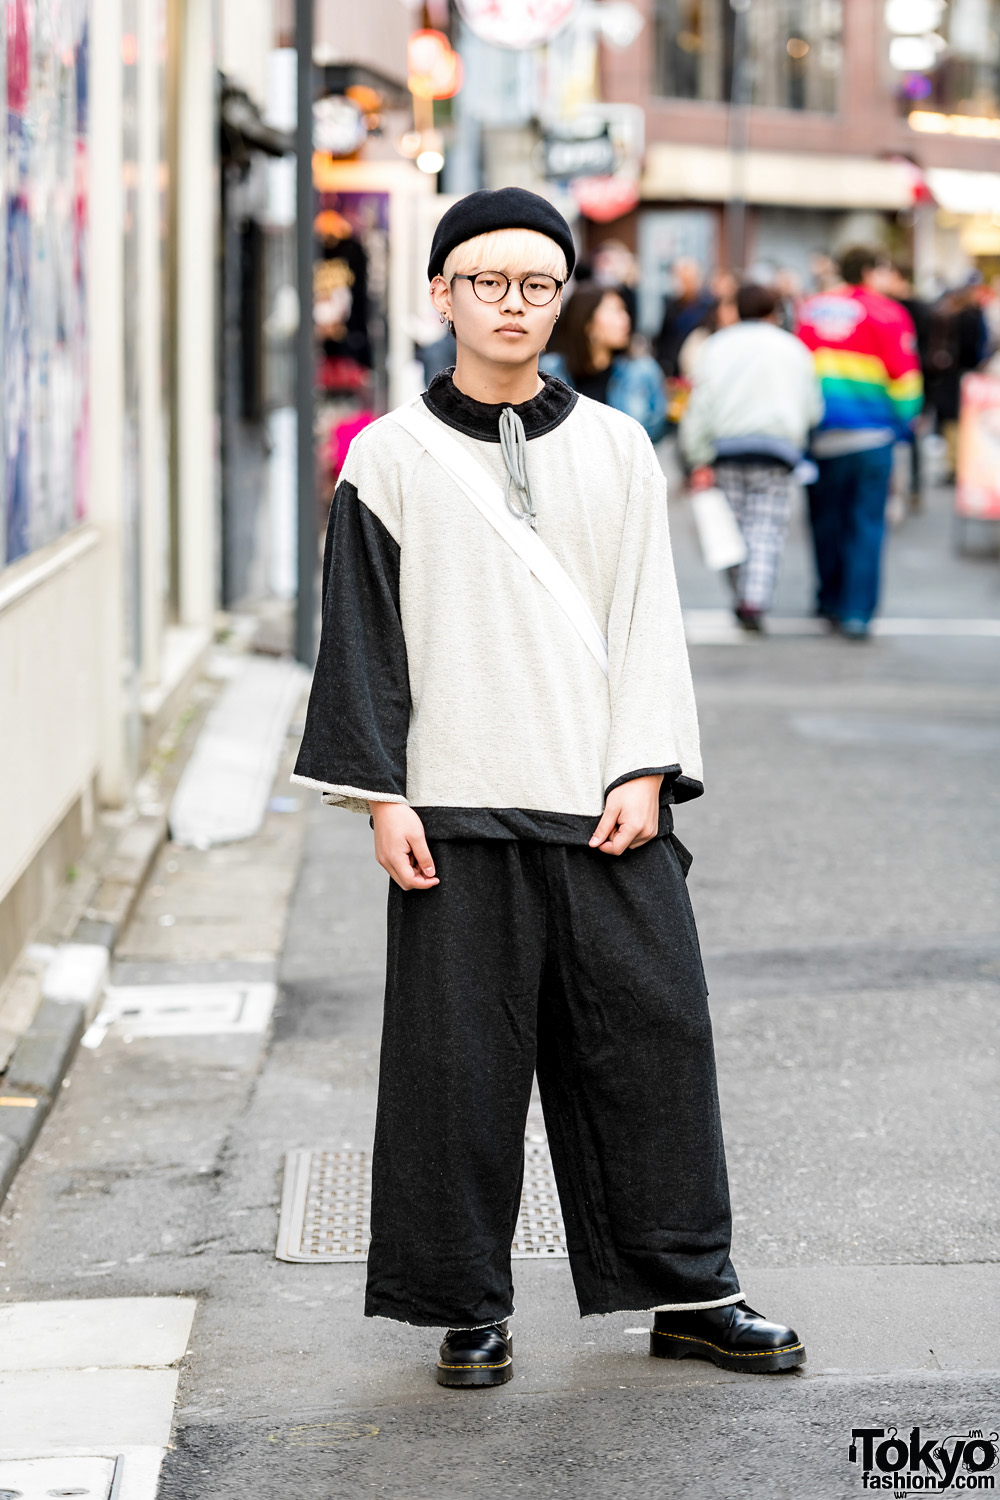 Japanese Monochrome Street Style w/ Amatunal Outfit, Dr. Martens Boots ...